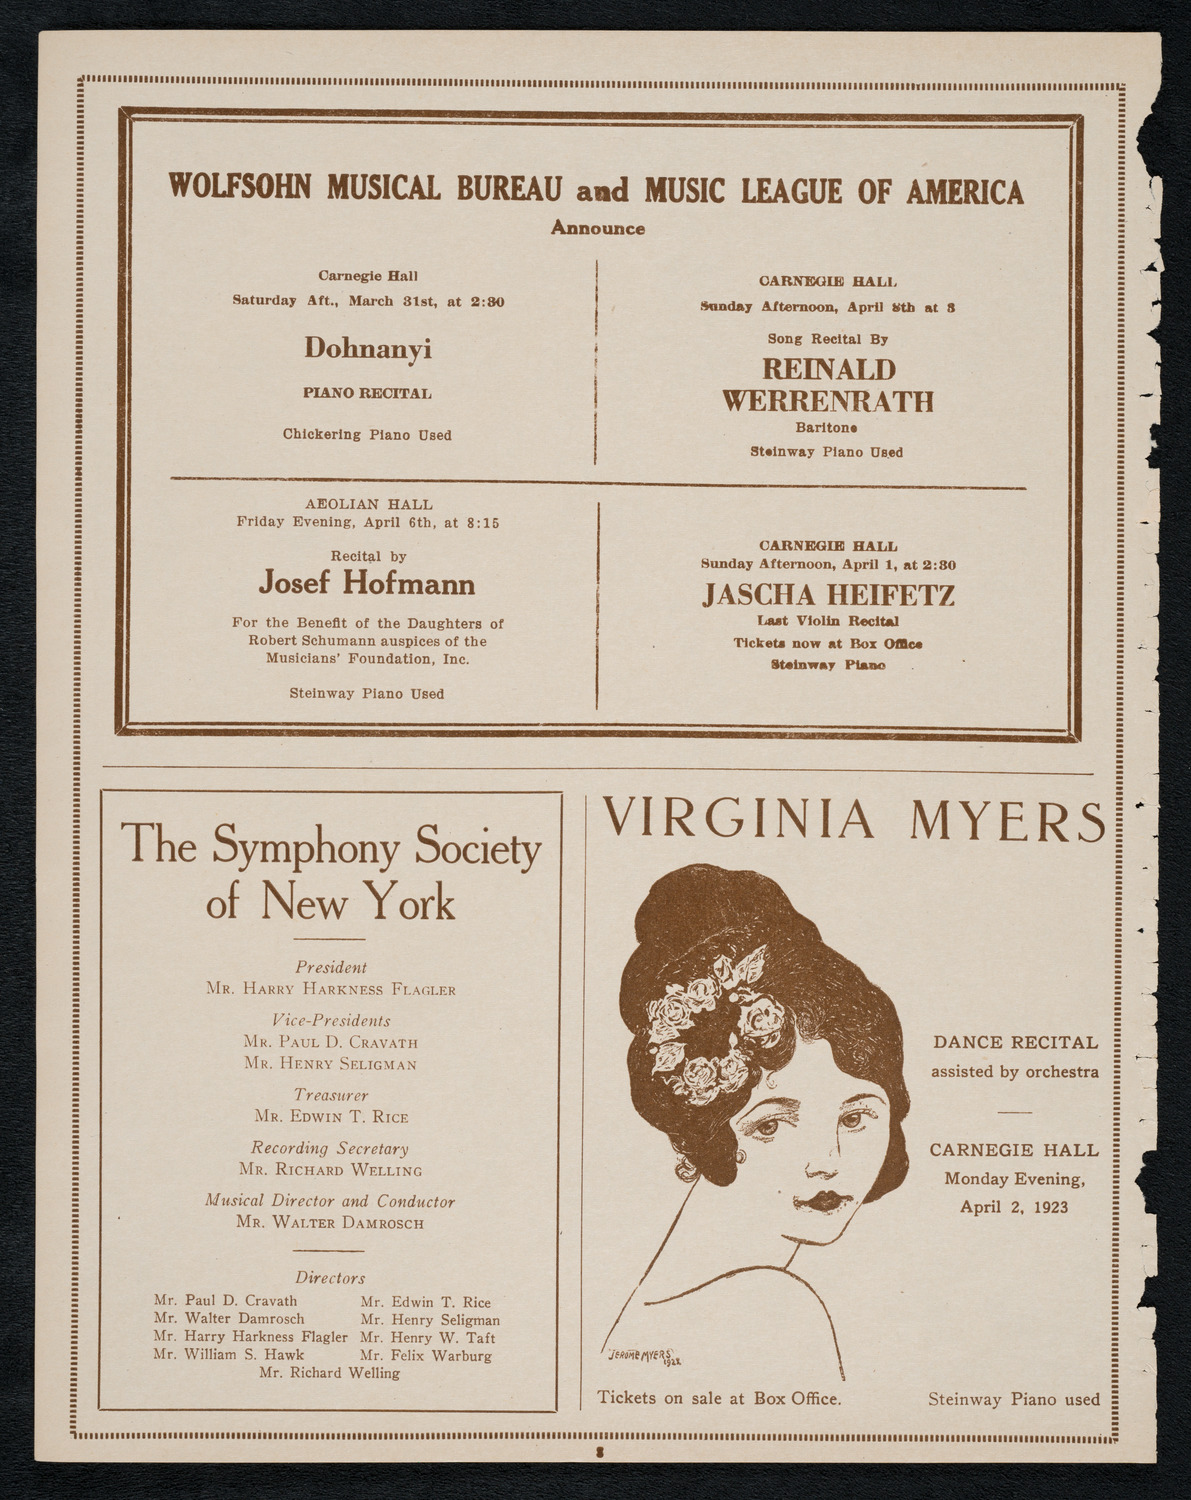 Universal Negro Improvement Association Meeting and Concert, March 27, 1923, program page 8